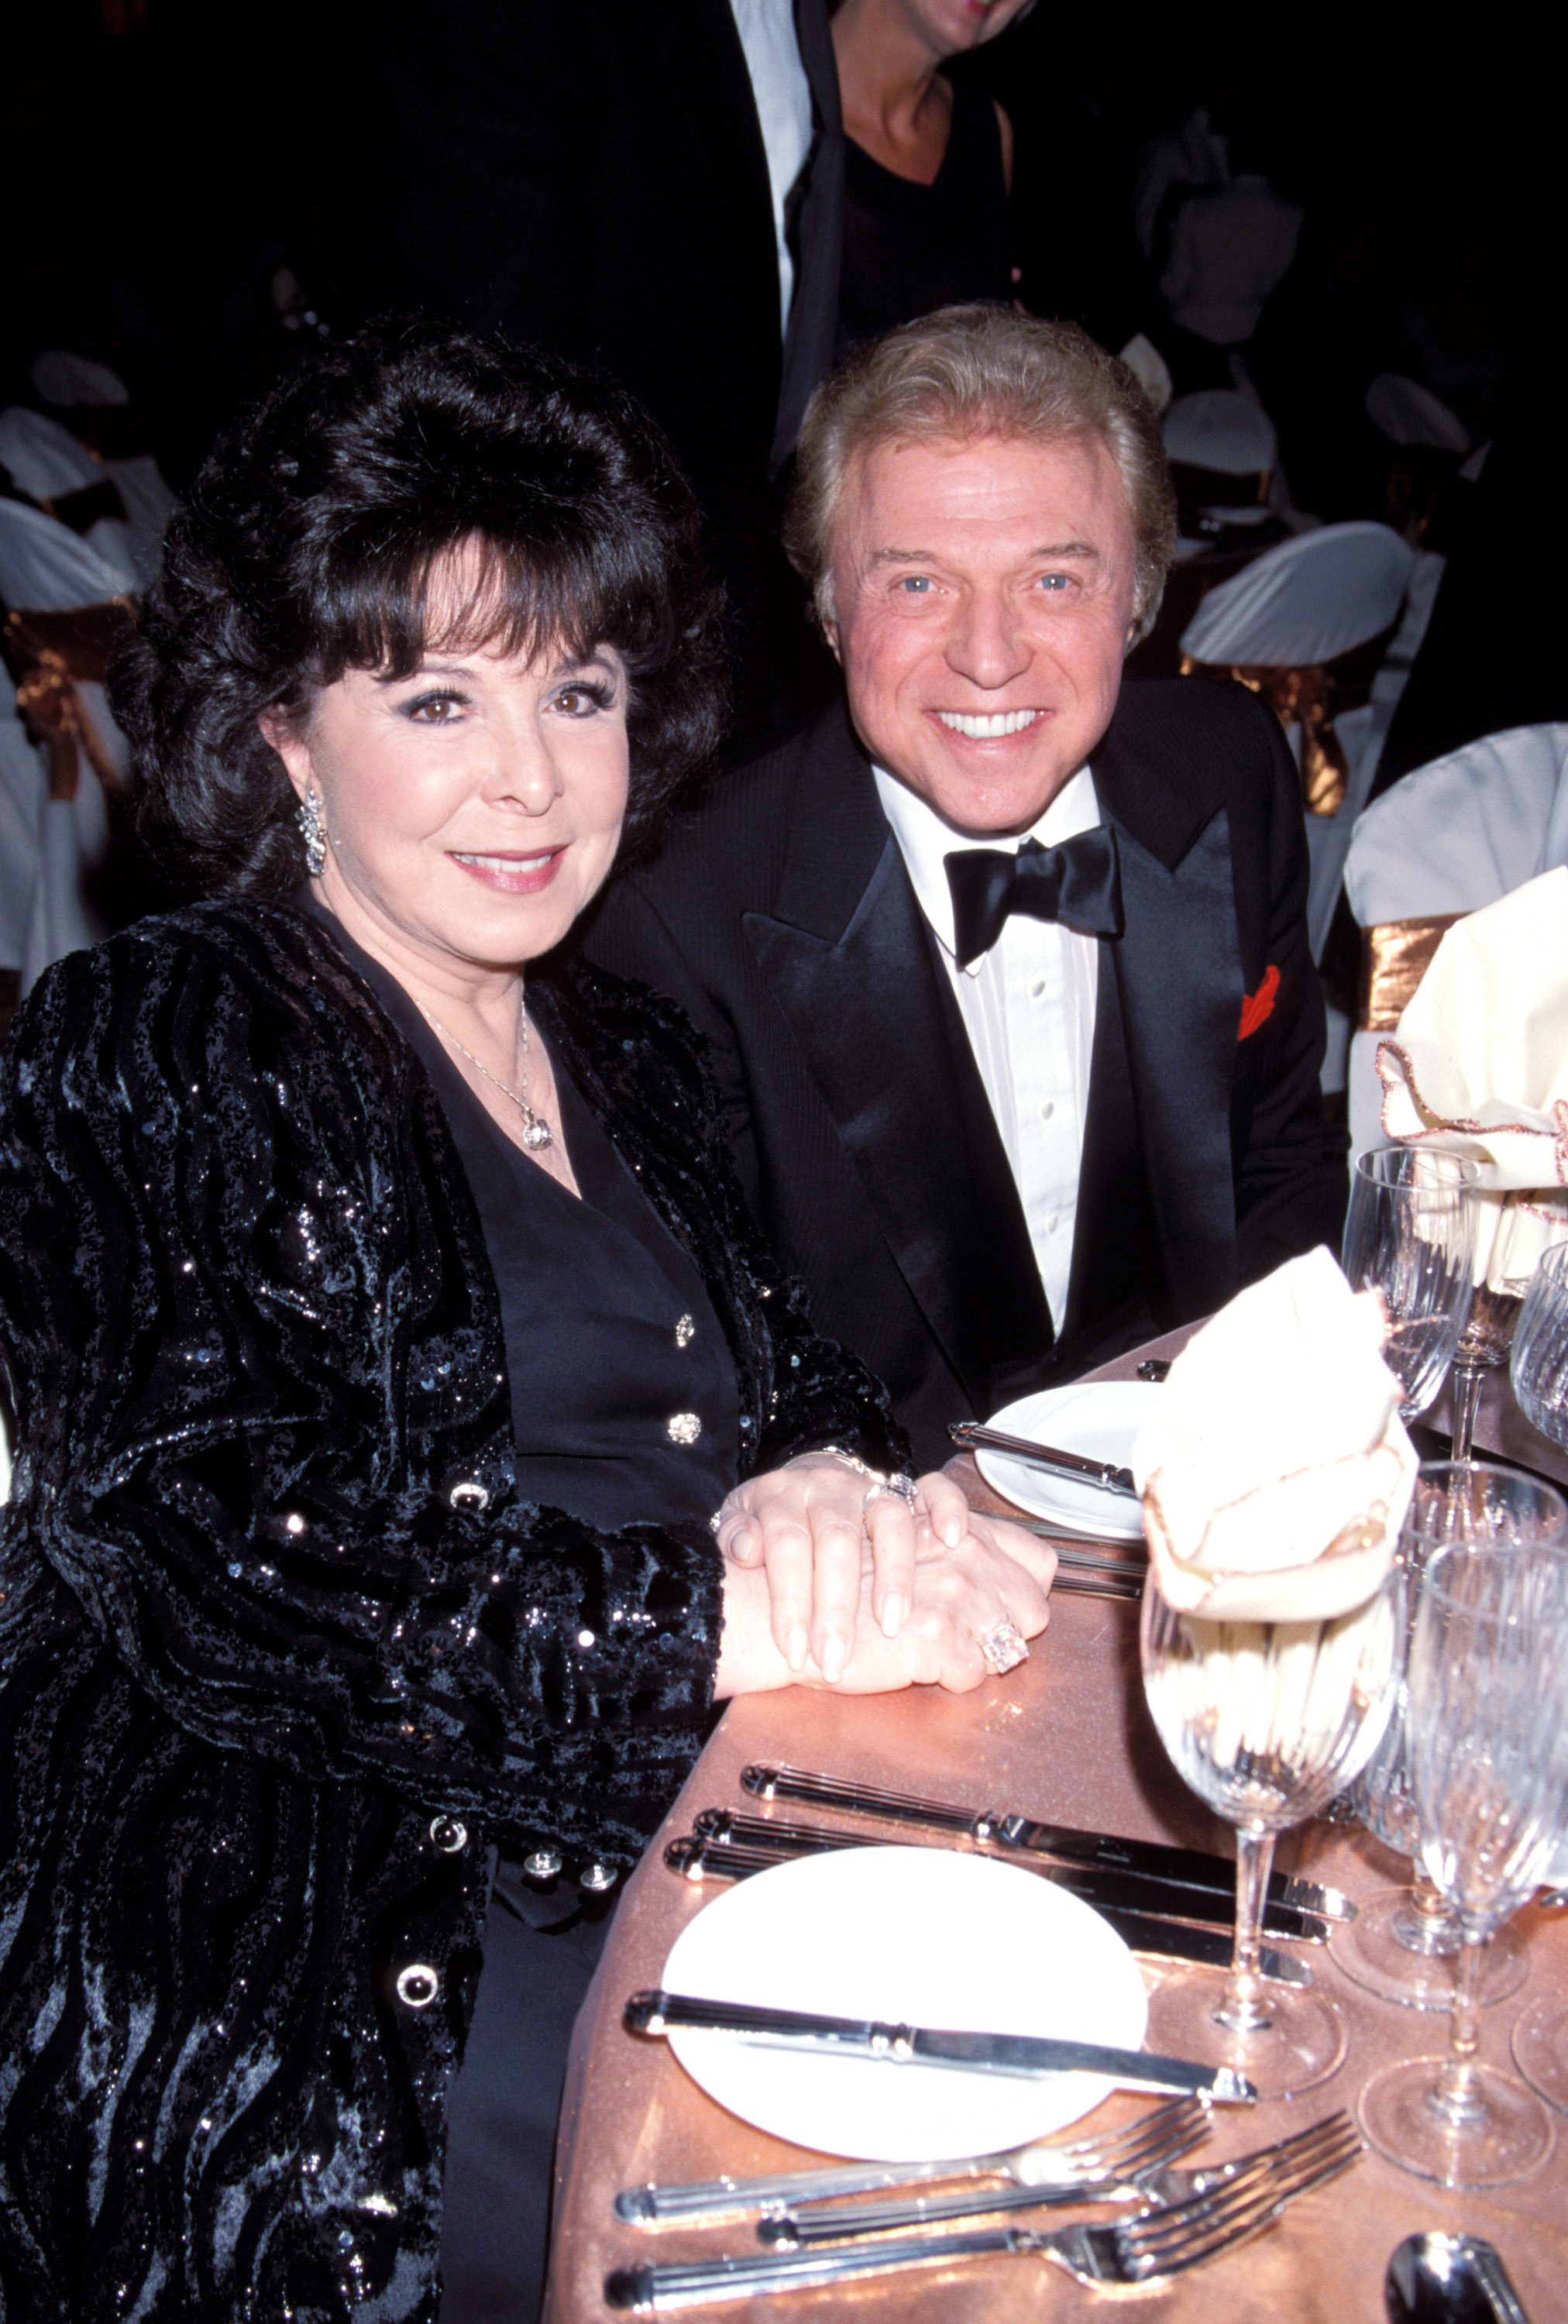 Eydie Gorme and Steve Lawrence during Frank Sinatra Las Vegas Celebrity Classic, circa 1998. | Source: Getty Images